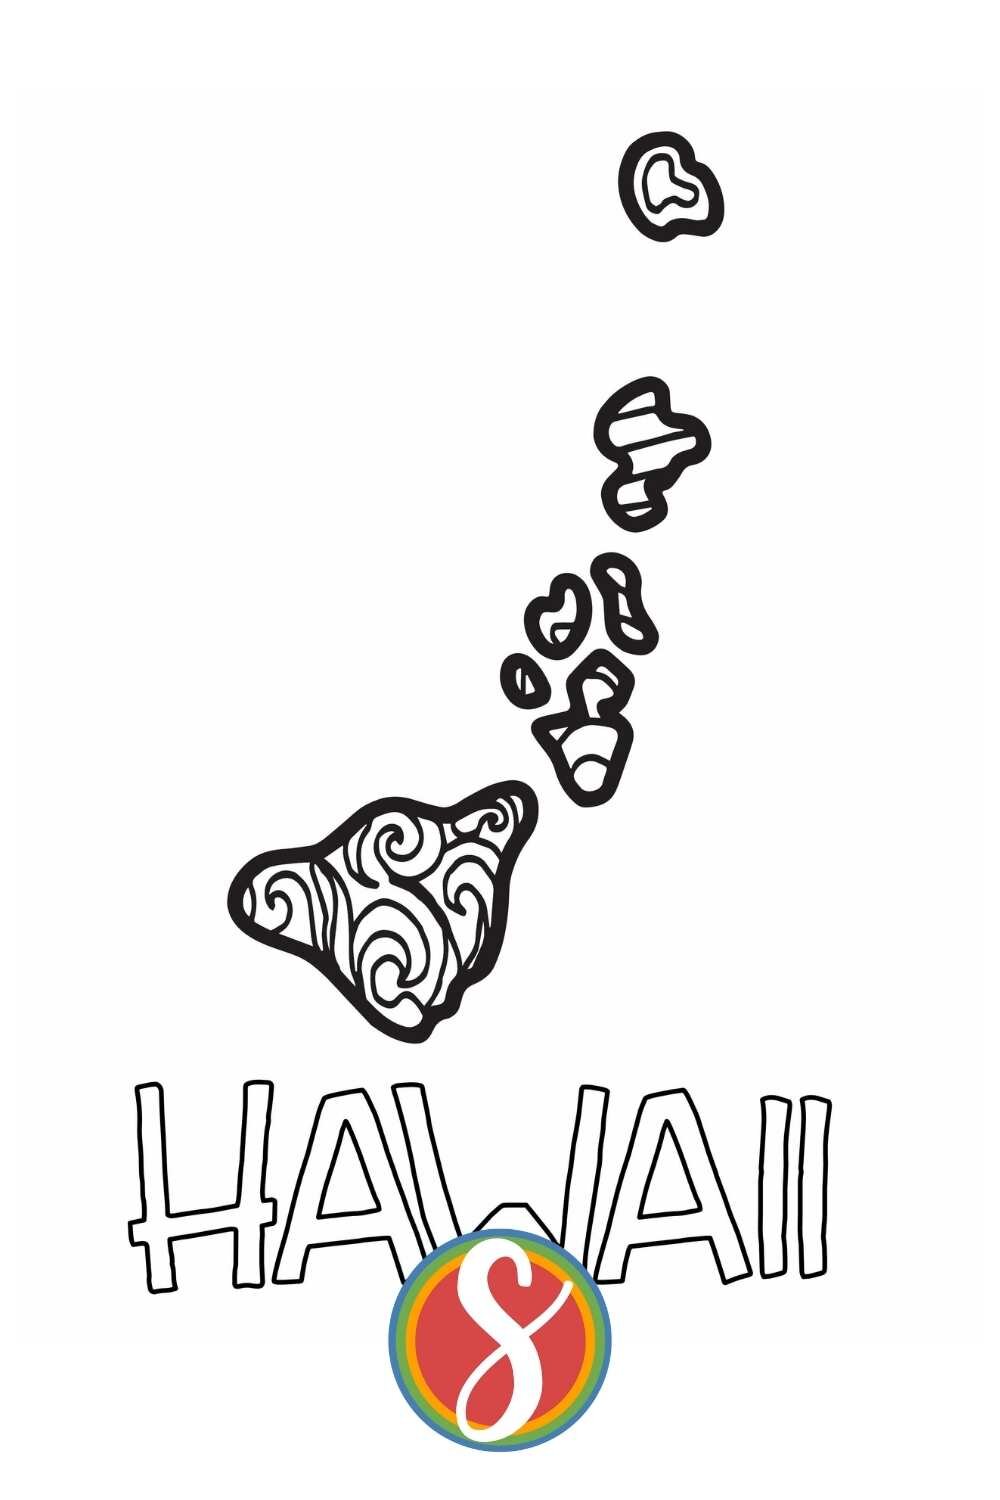 free-hawaii-coloring-pages-stevie-doodles